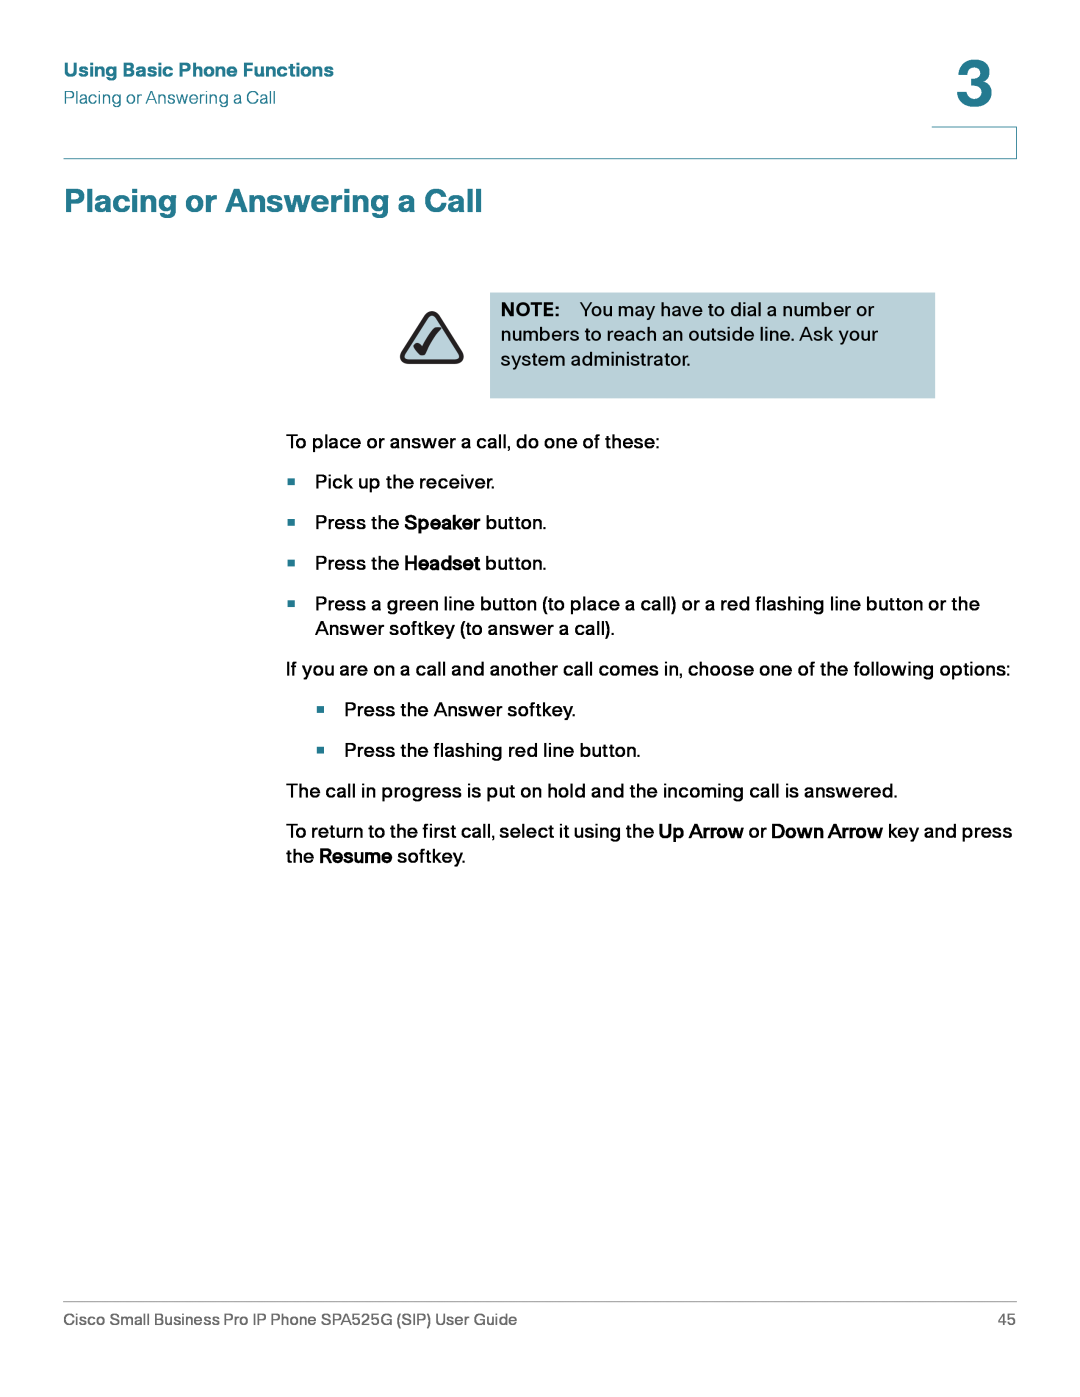 Cisco Systems SPA525G manual Placing or Answering a Call, Using Basic Phone Functions 